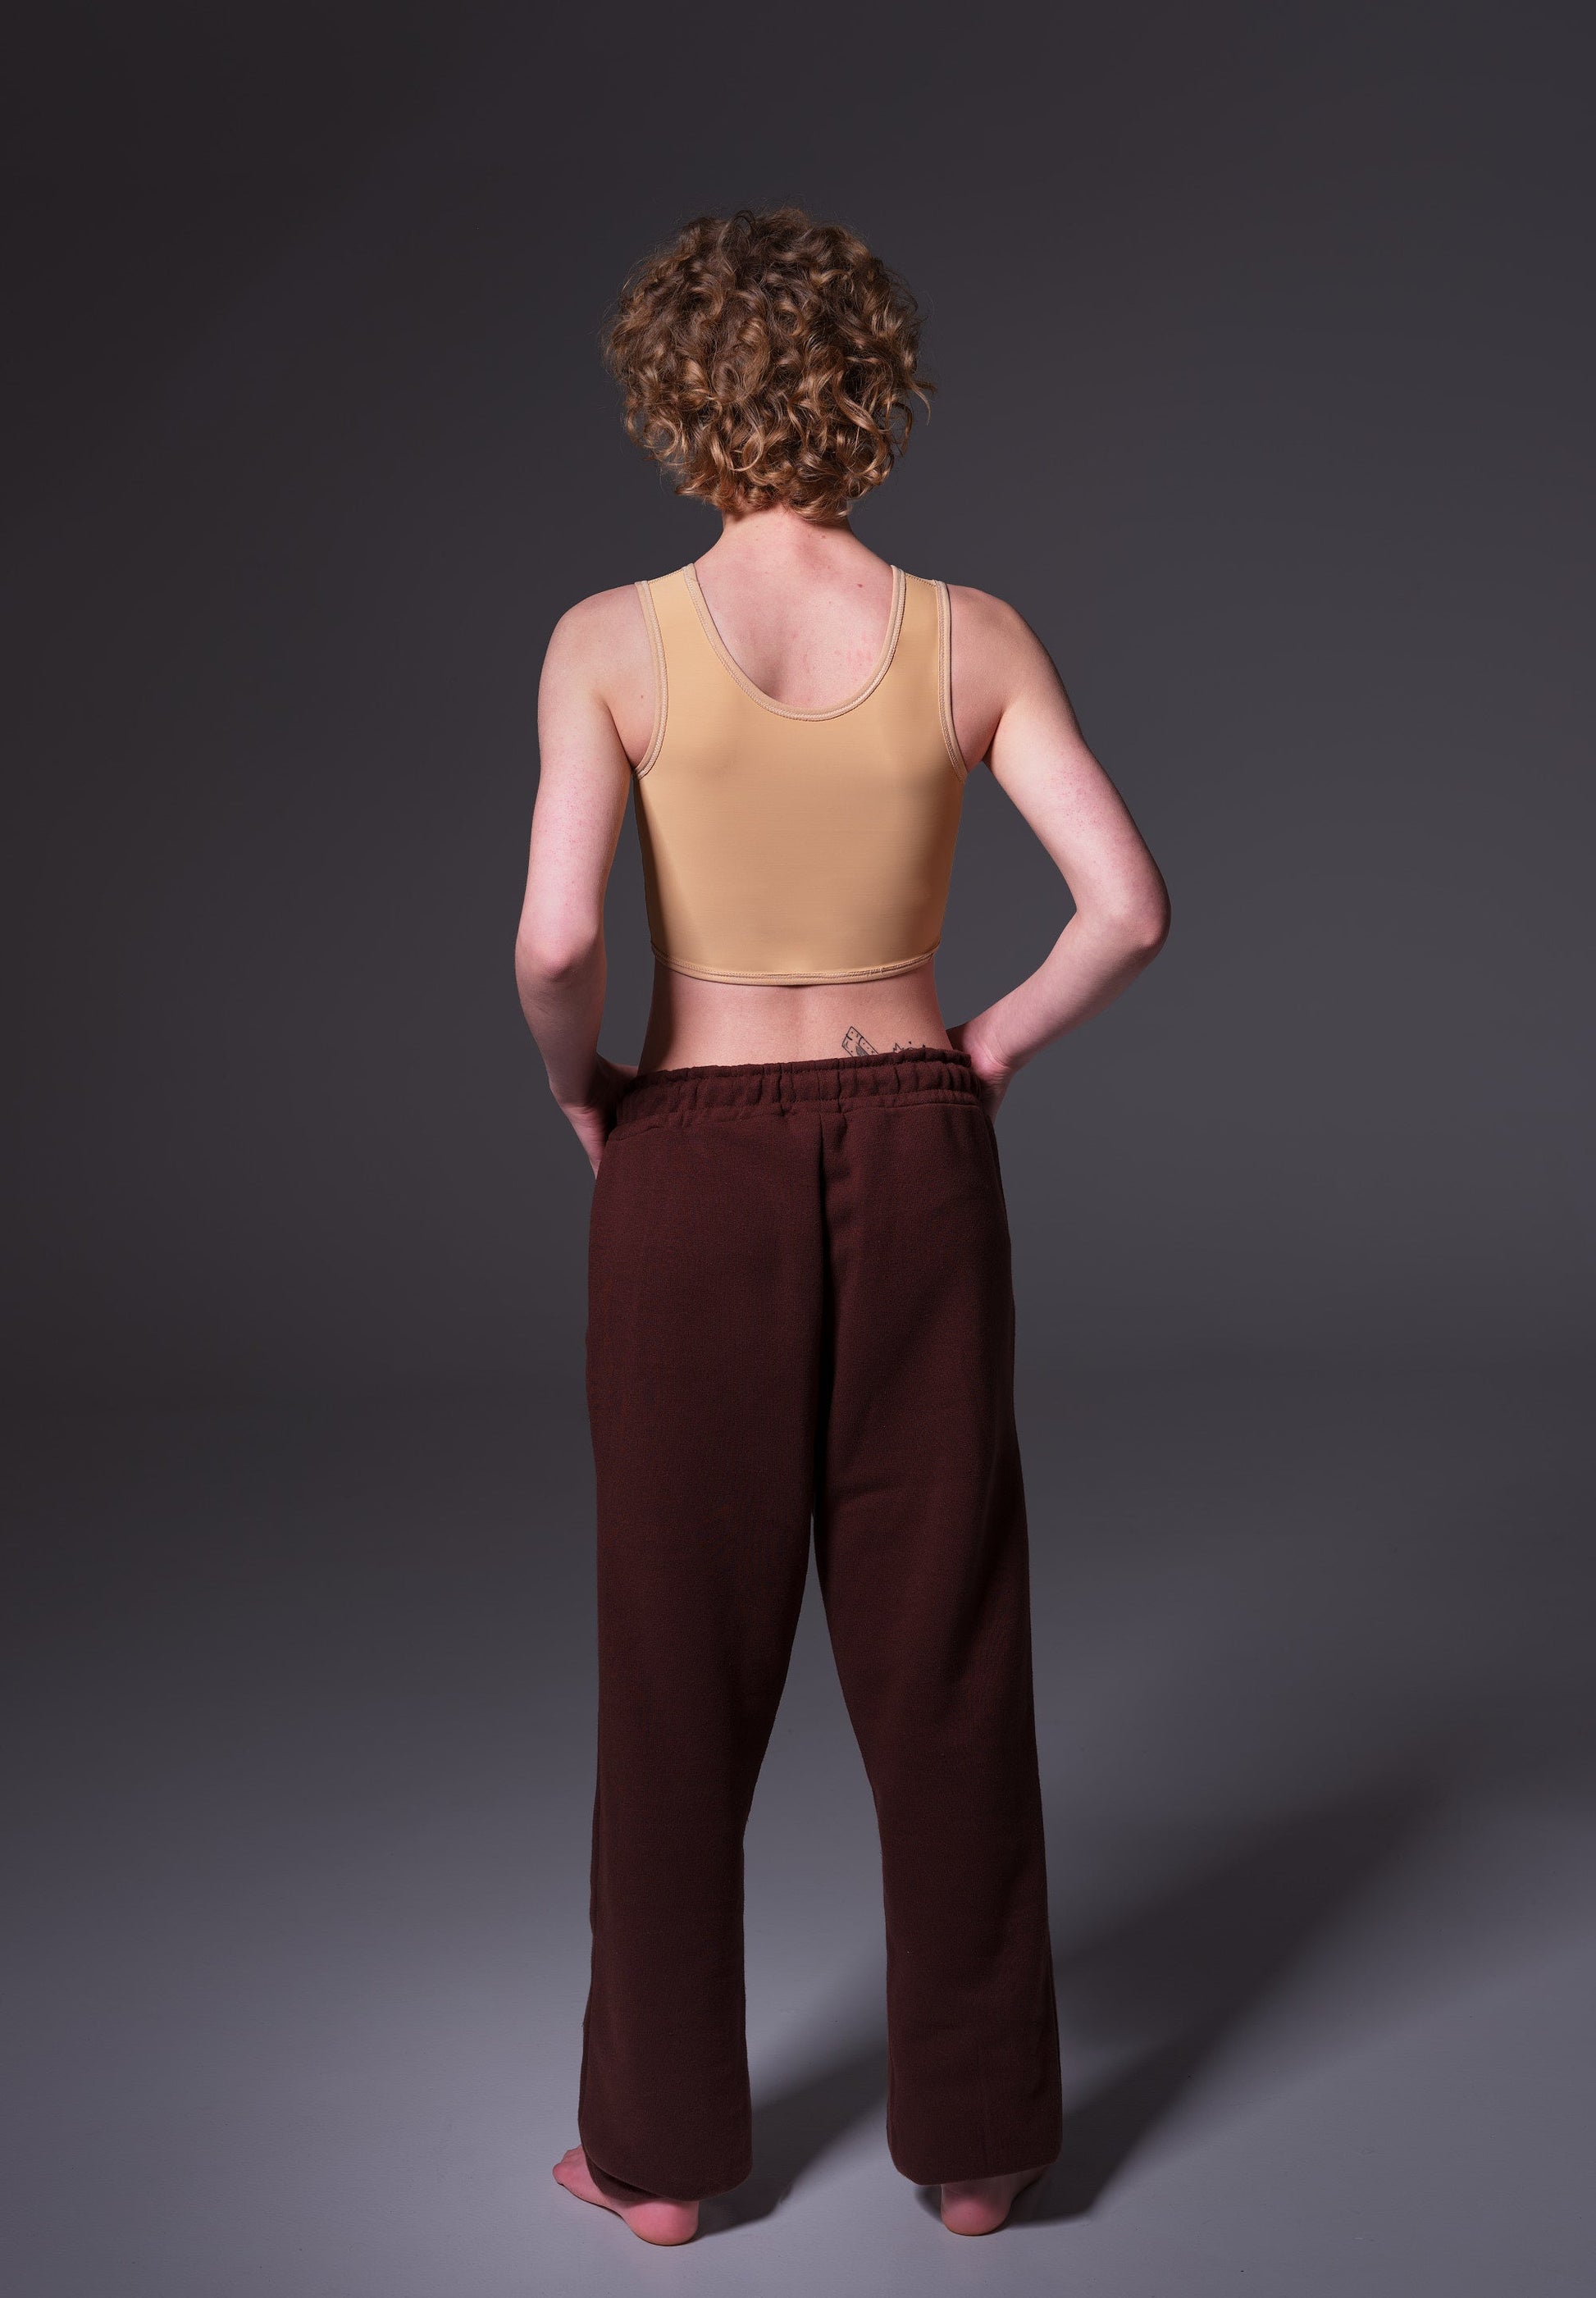 Back view of the short binder worn by Lo in the color caramel